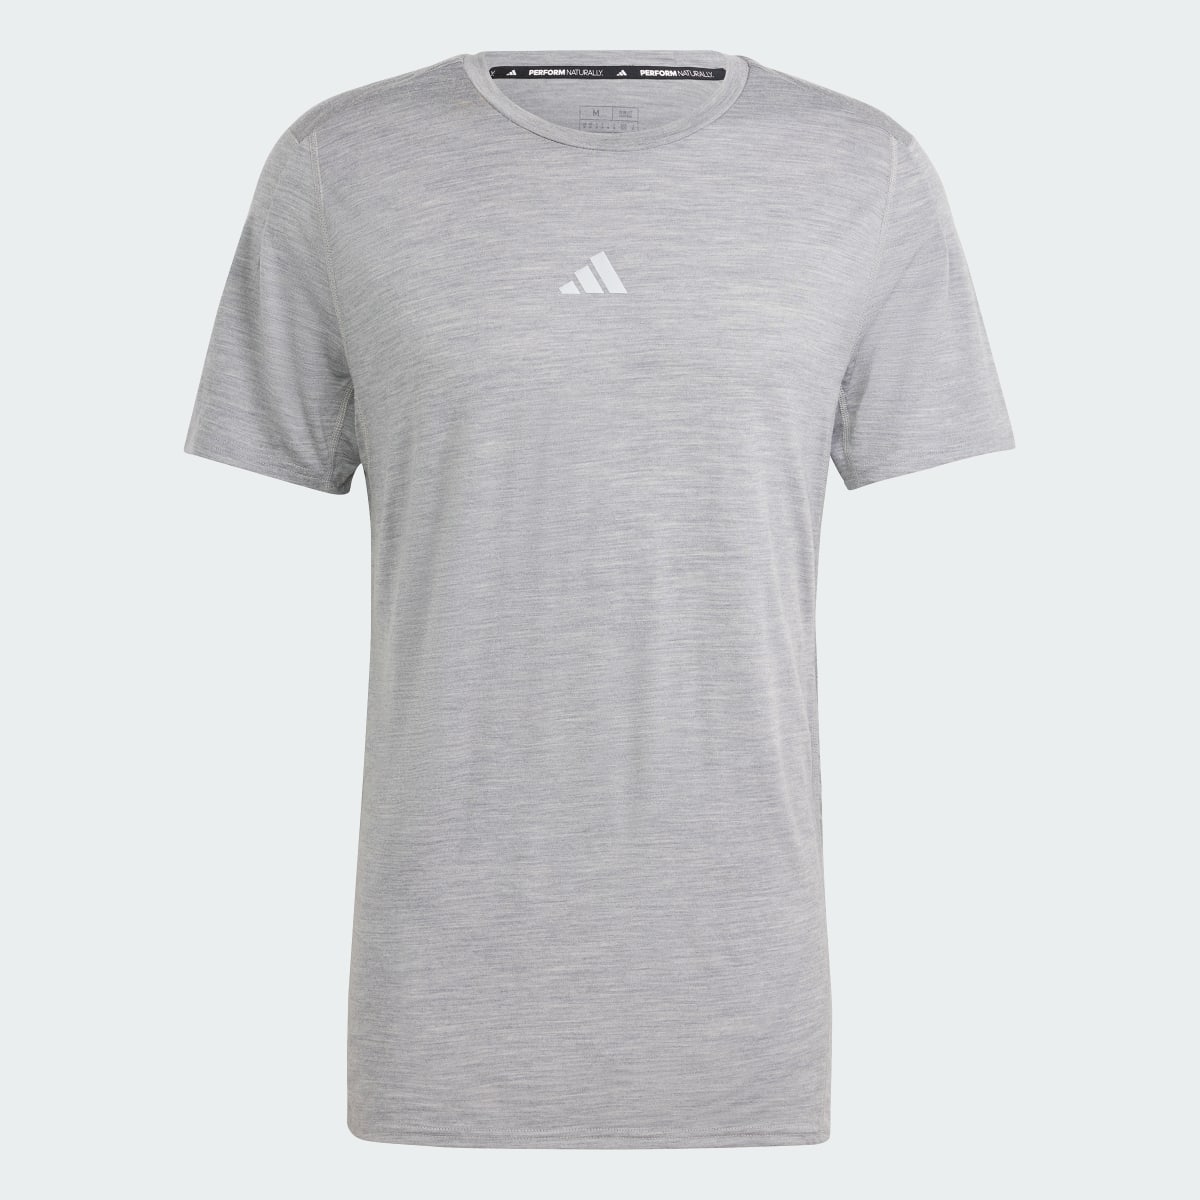 Adidas Ultimate Running Conquer the Elements Merino Tee. 5